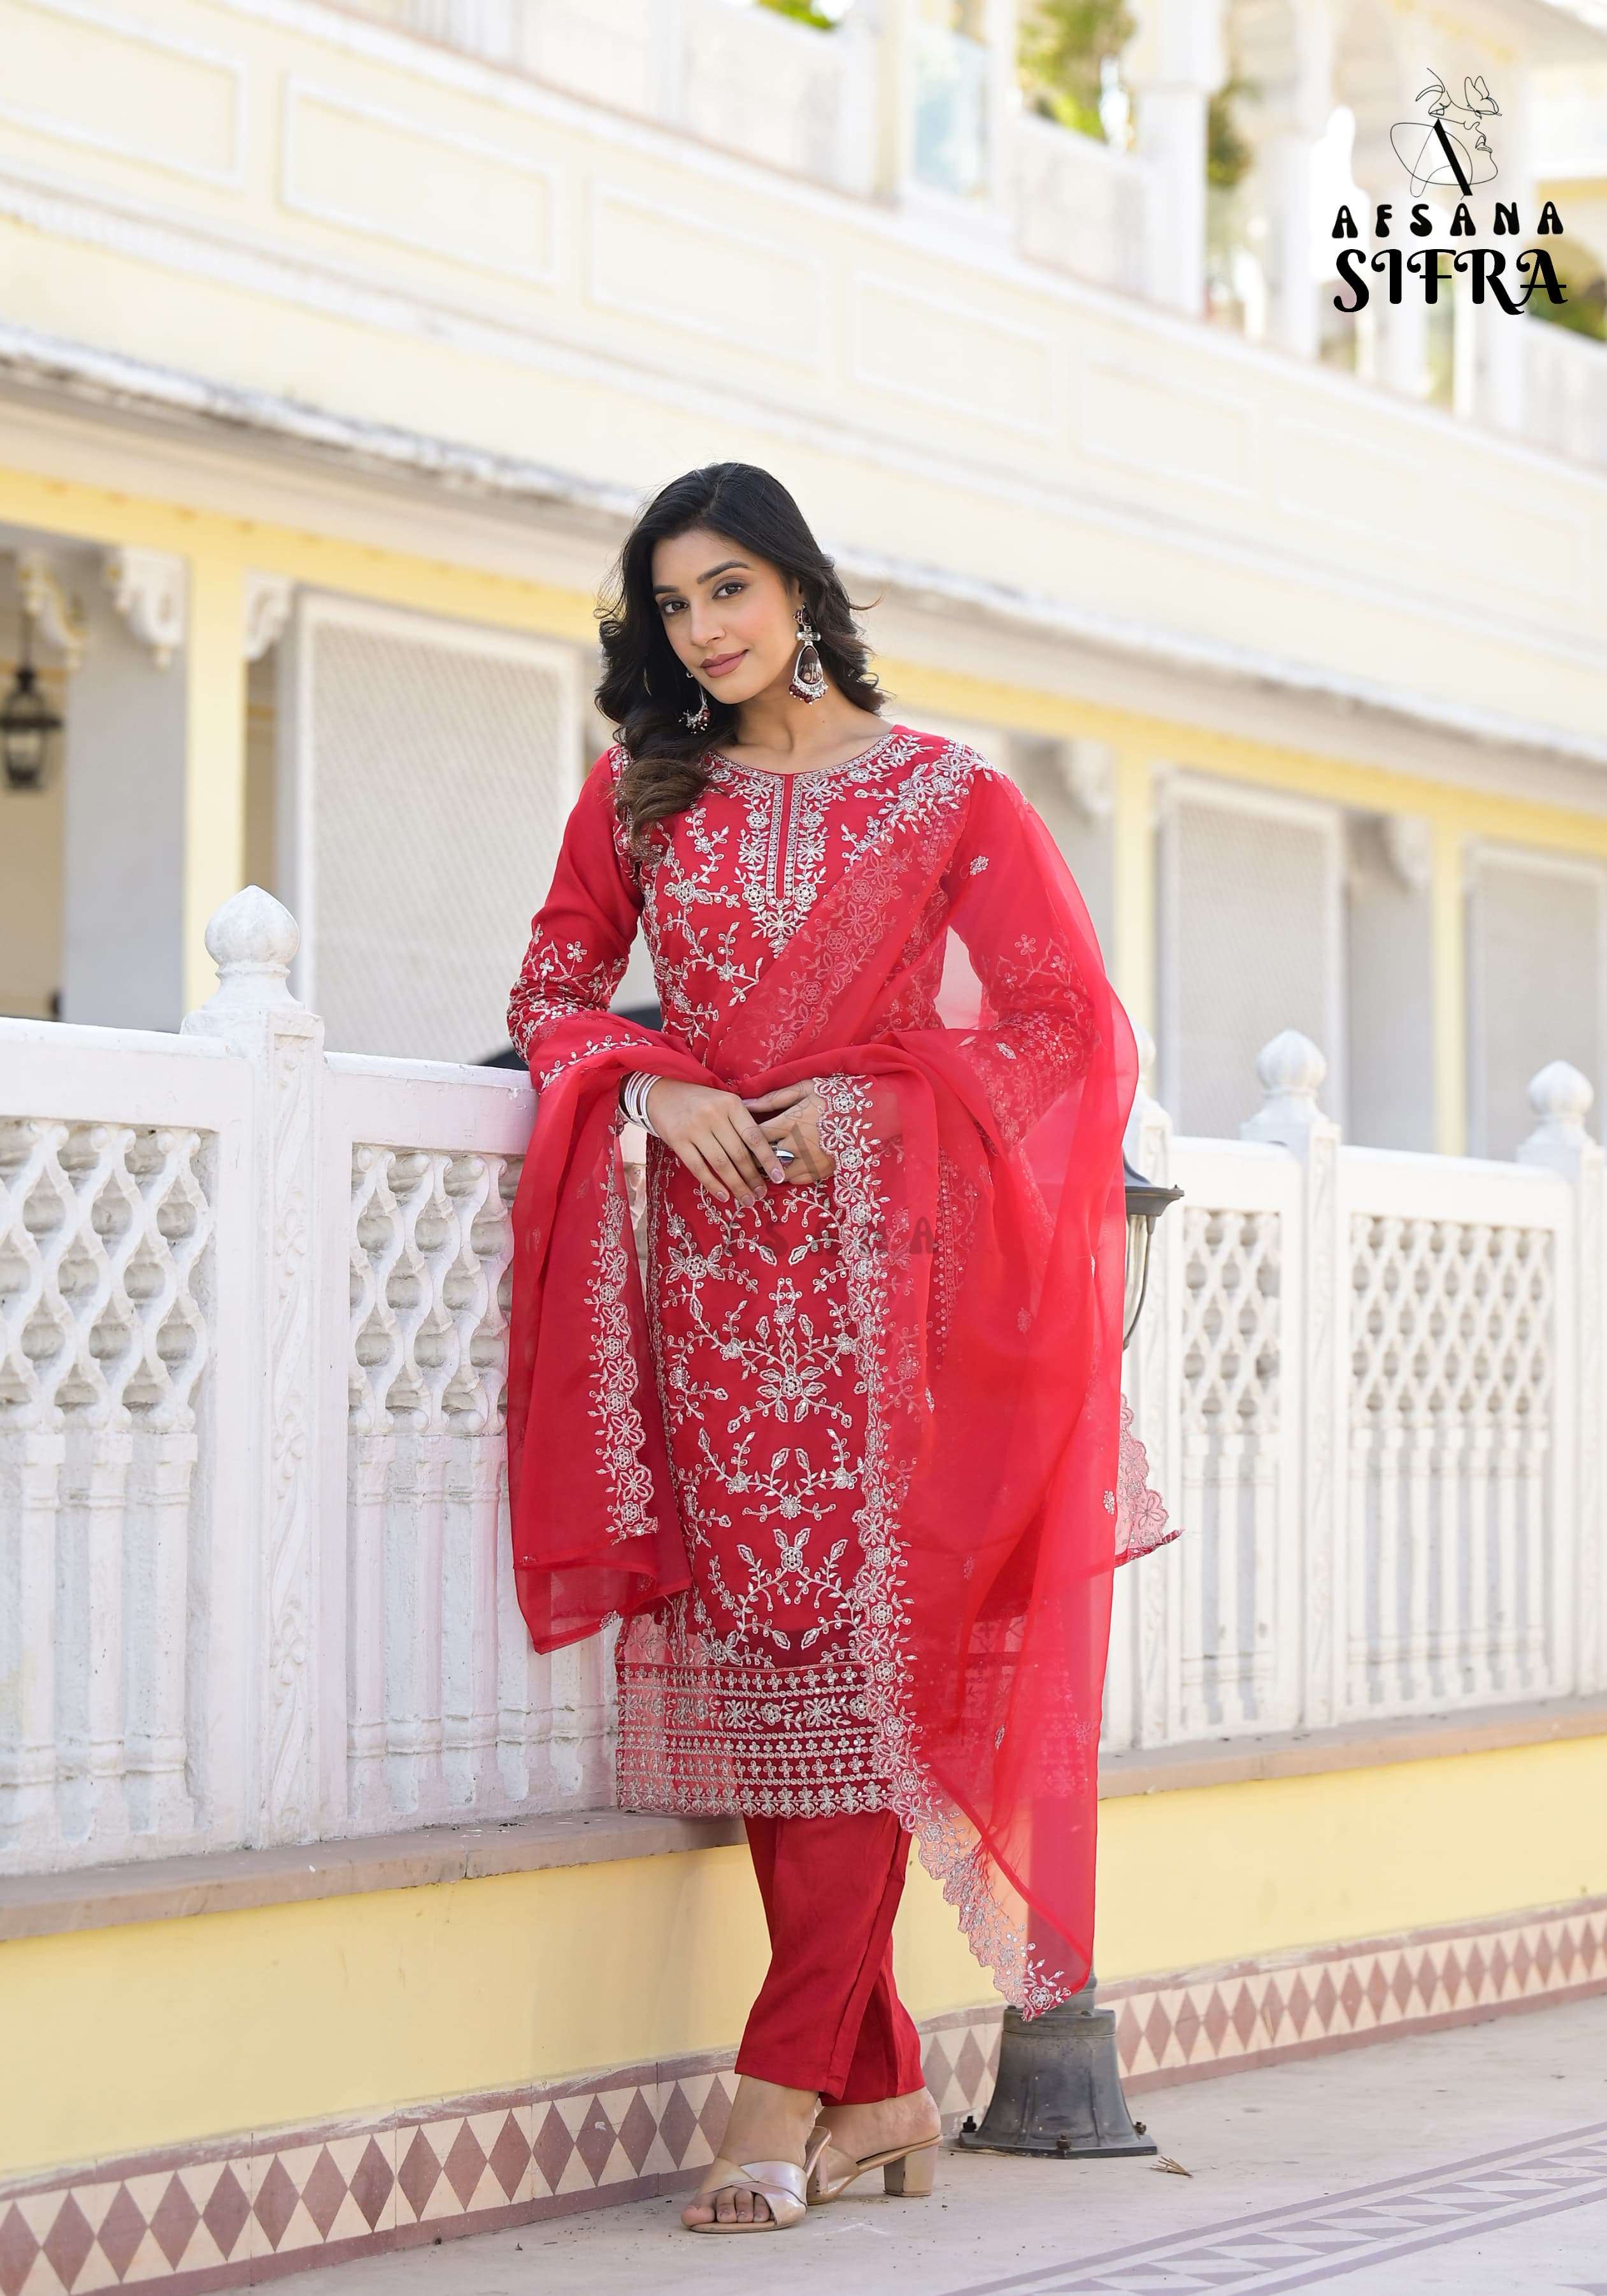 afsana sifra orgenza embroidery look top bottom with dupatta size set